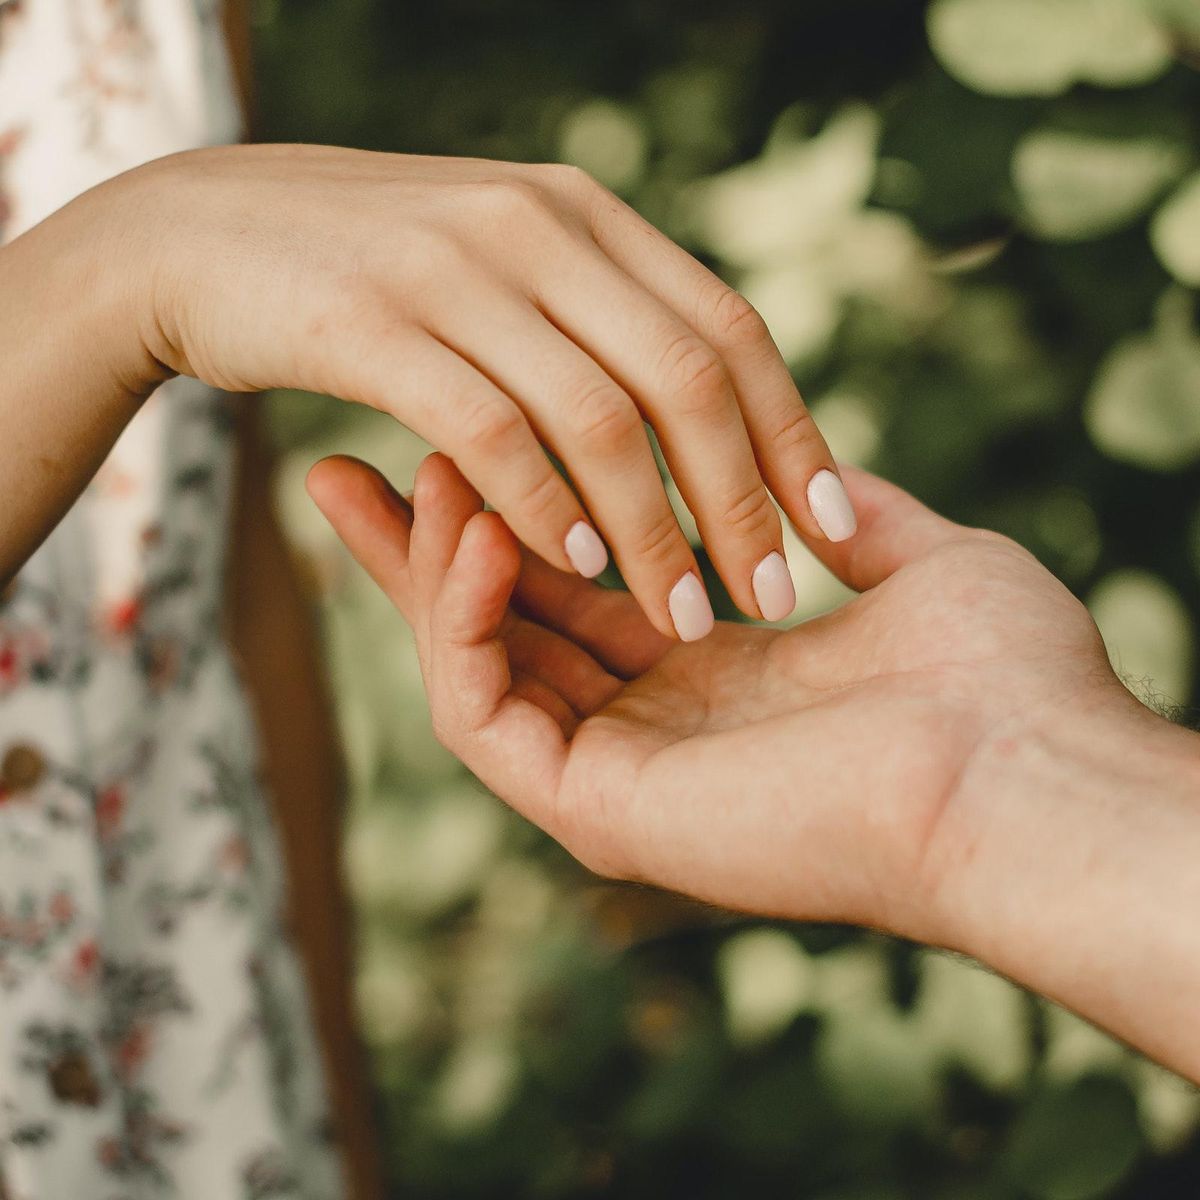 6 Types Of Intimacy holding hands outside in a garden